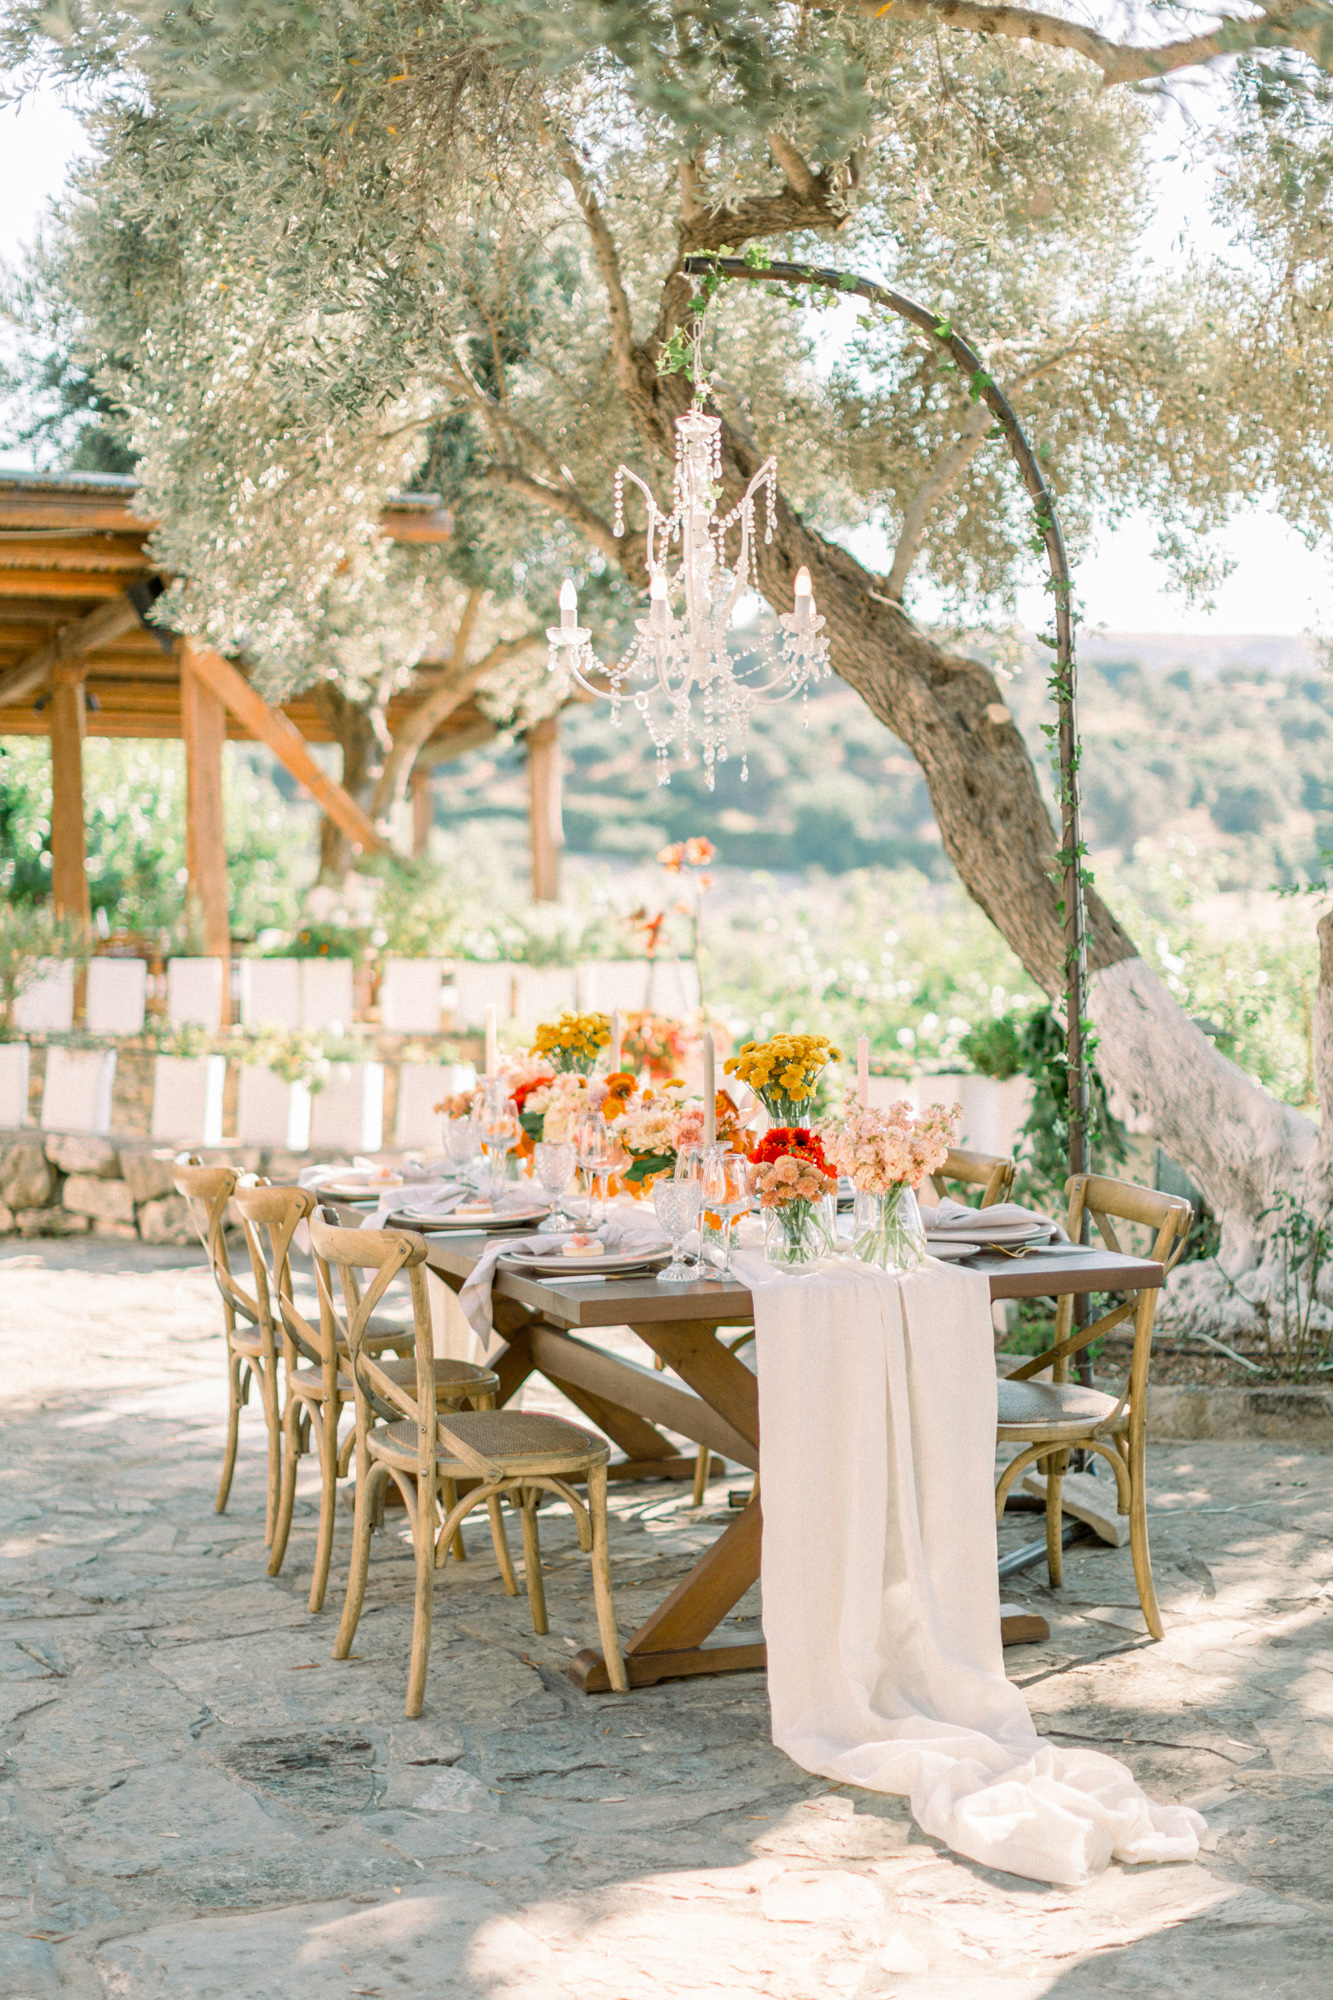 Reception decoration flowers and details by R&C events and Oneiranthi for a wedding editorial in Grecotel Agreco Farms Crete Greece.